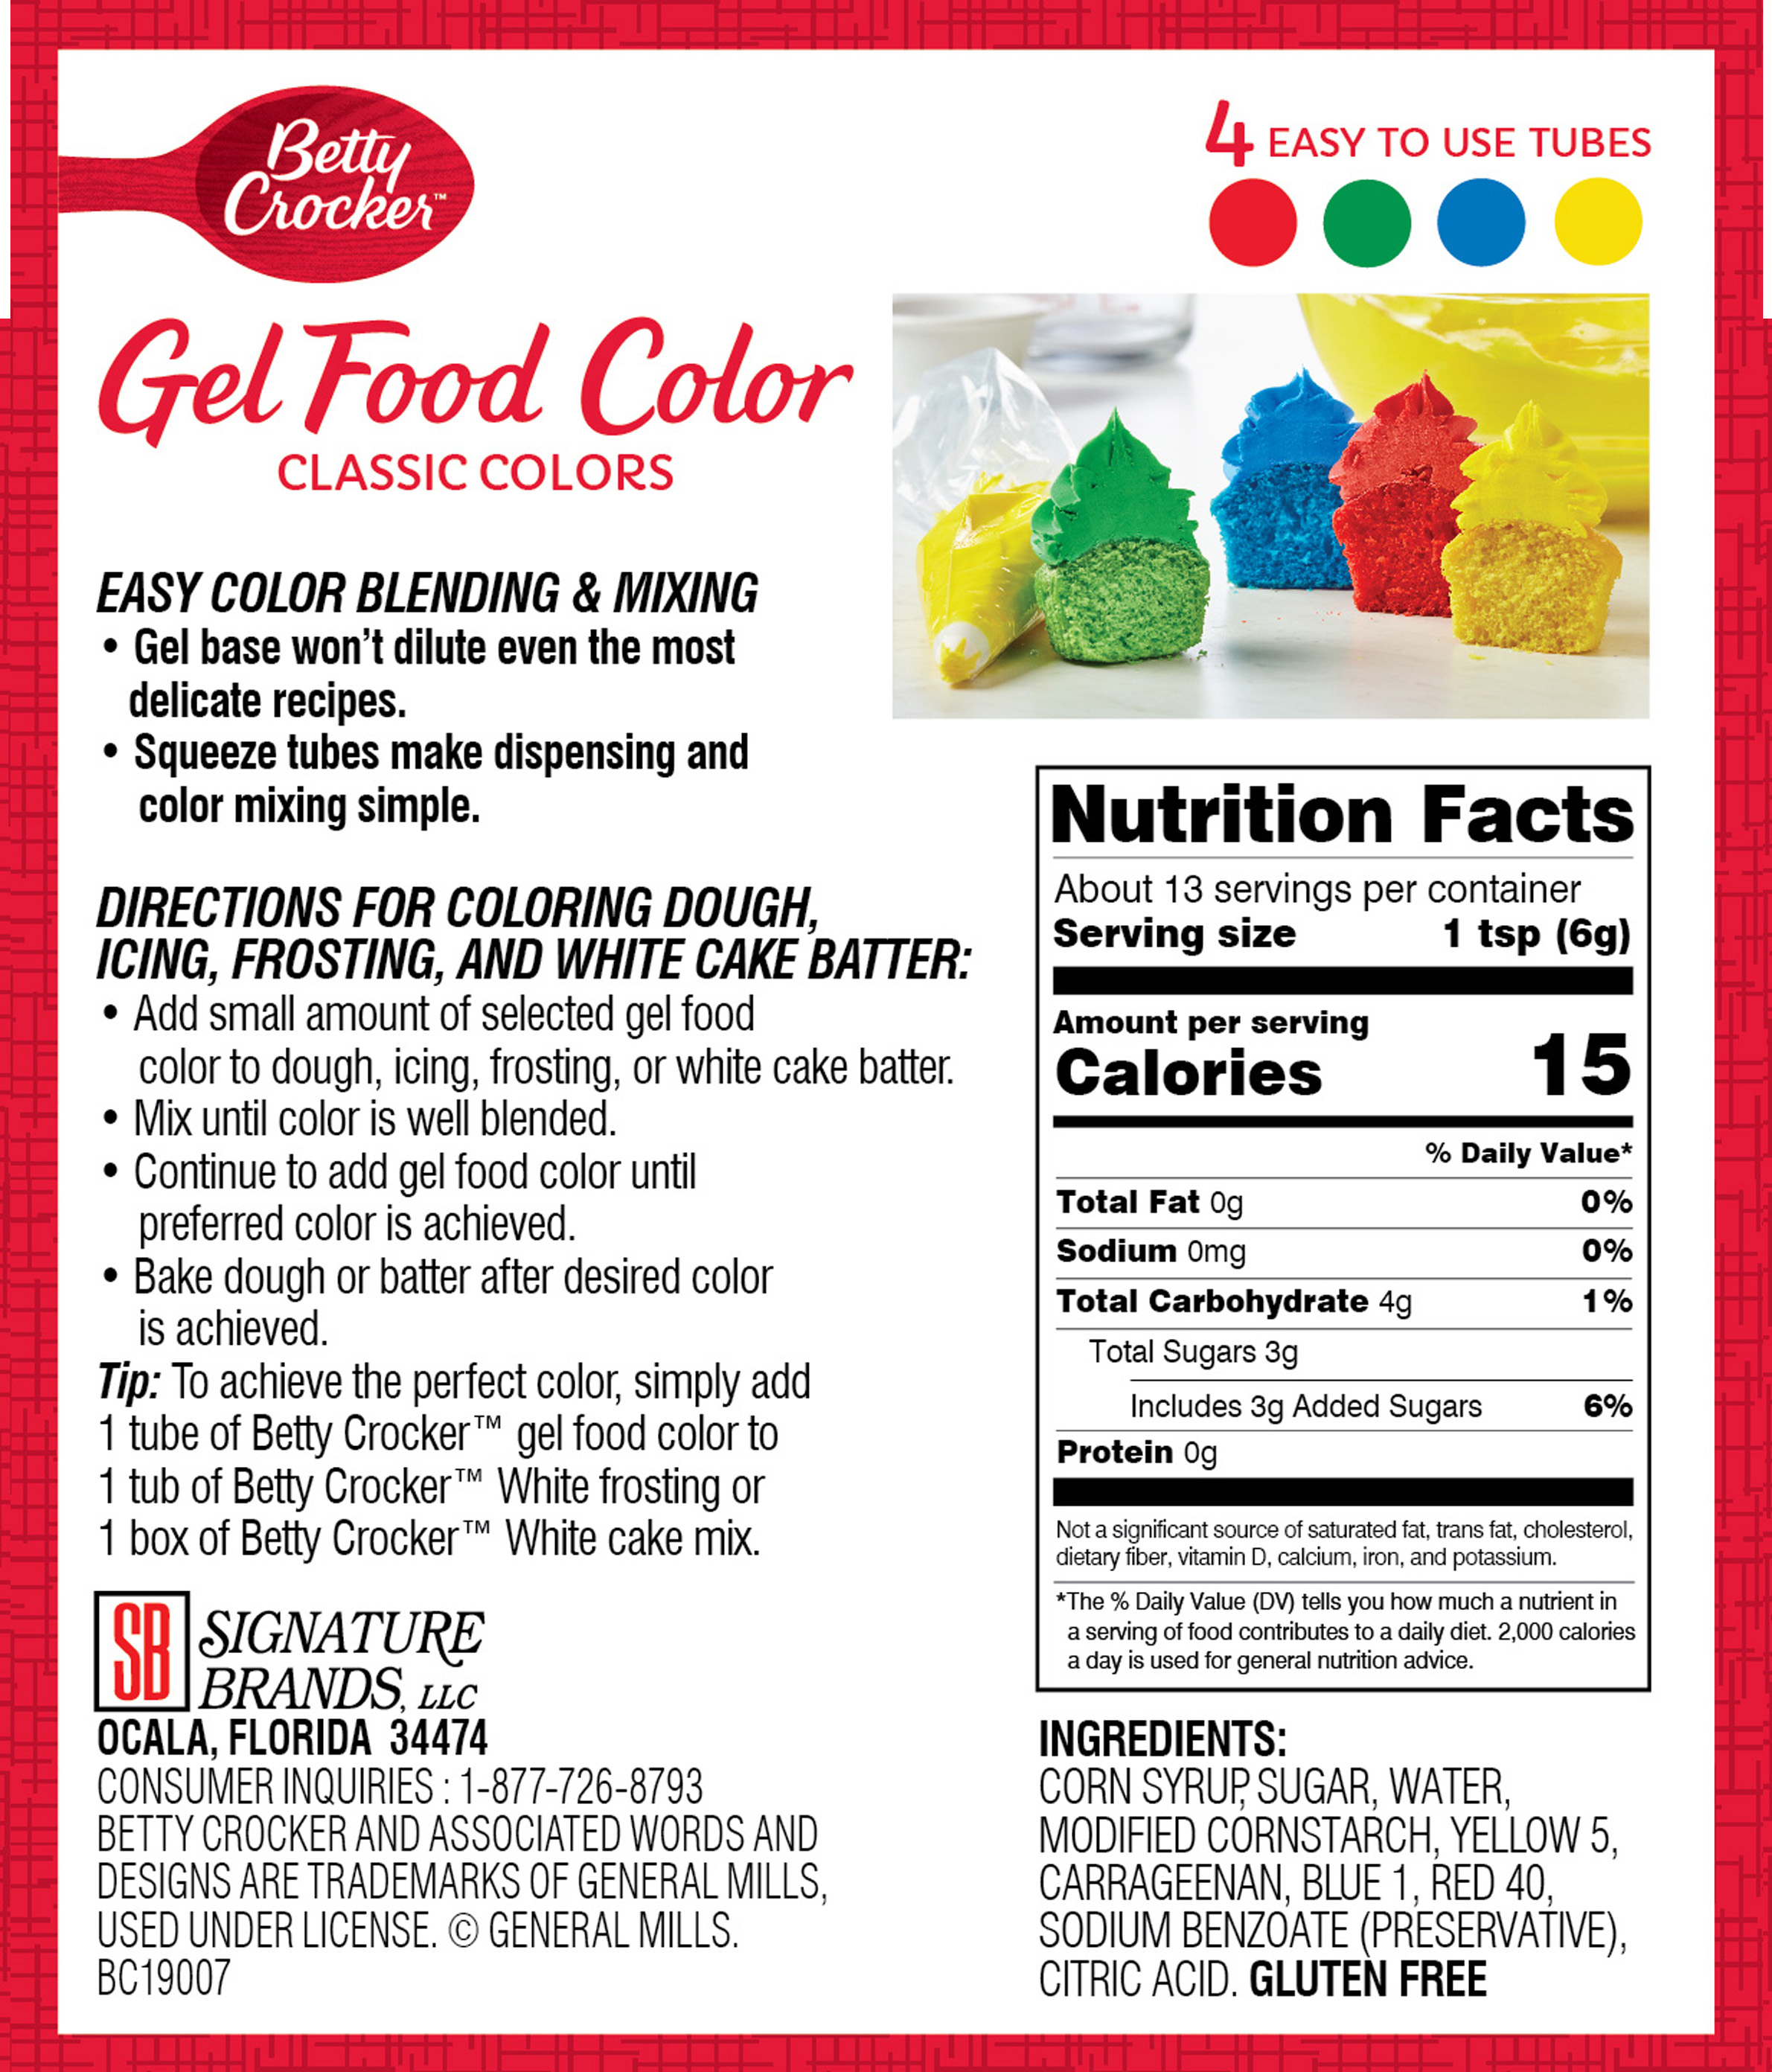 Betty Crocker Decorating Gel Food Color in Classic Colors, 2.7 oz. - image 2 of 3